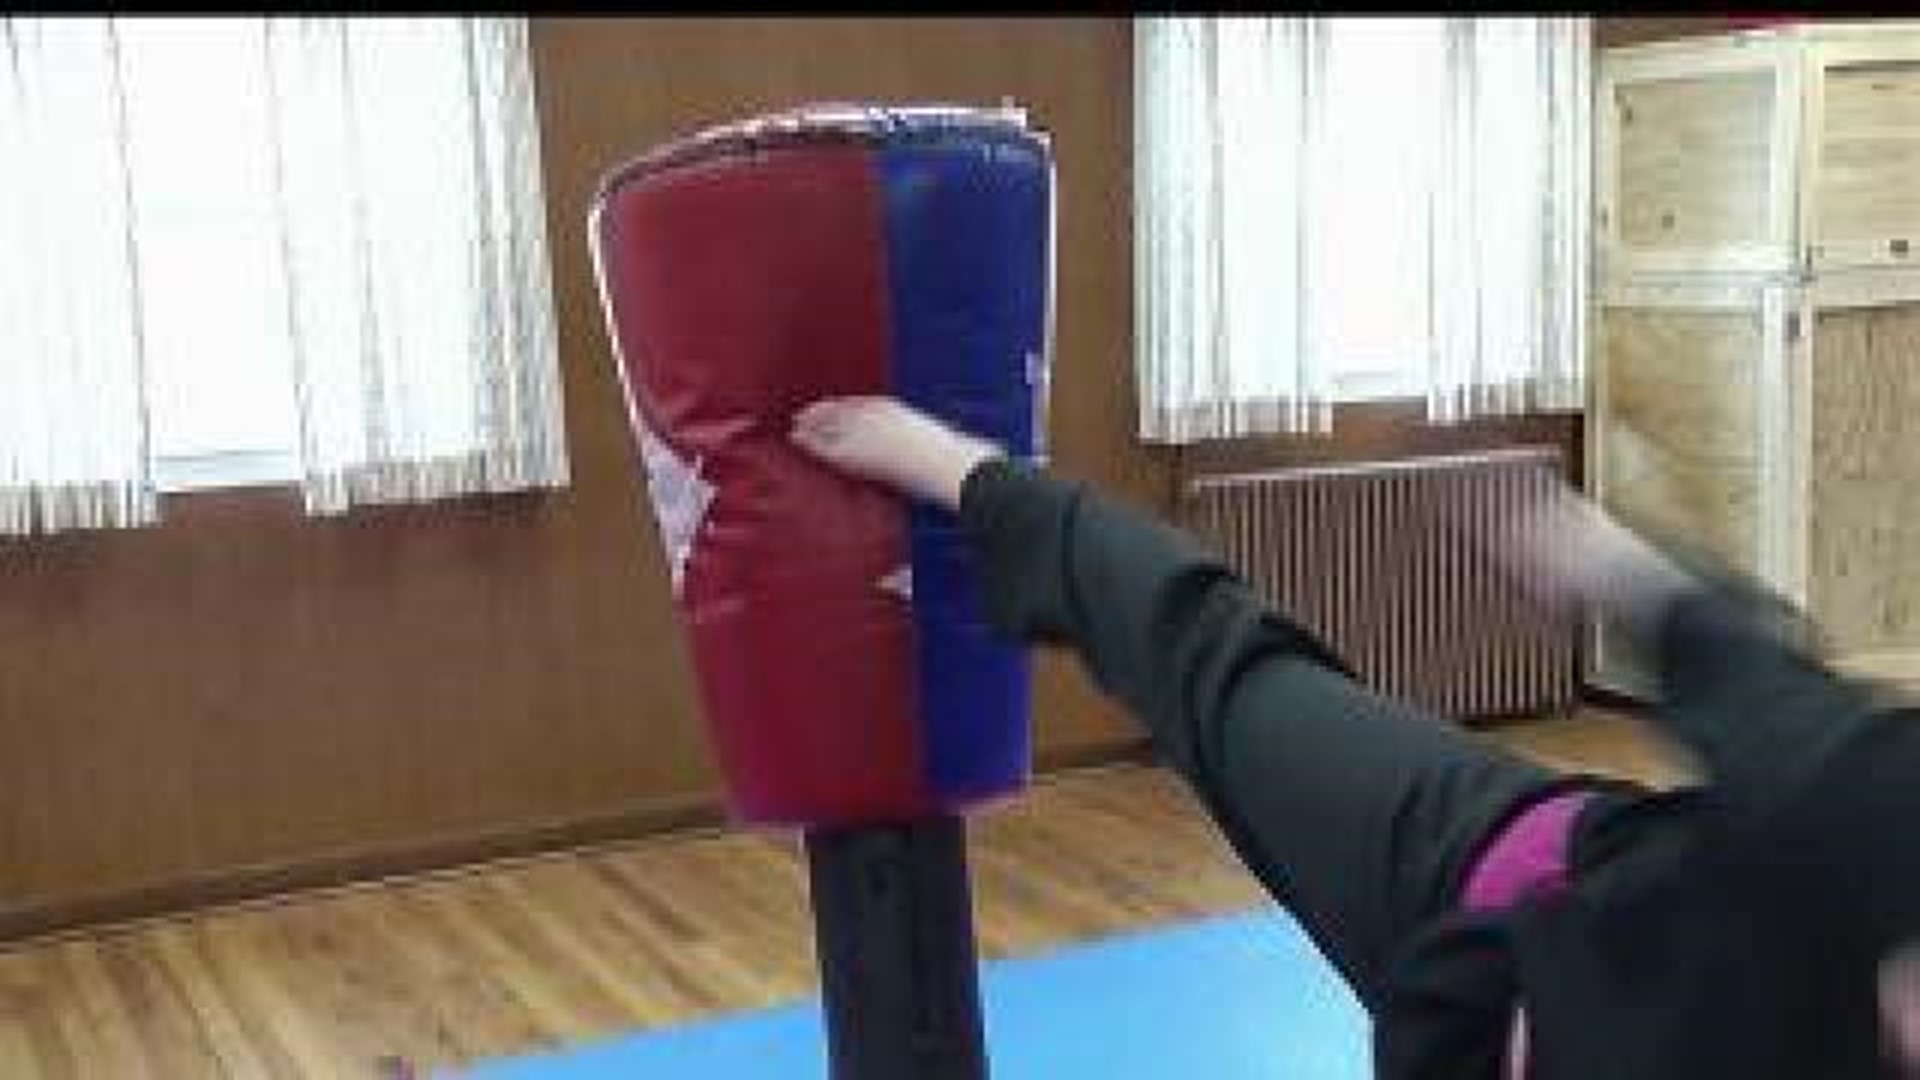 Tae Kwon Do acts as a lifesaver